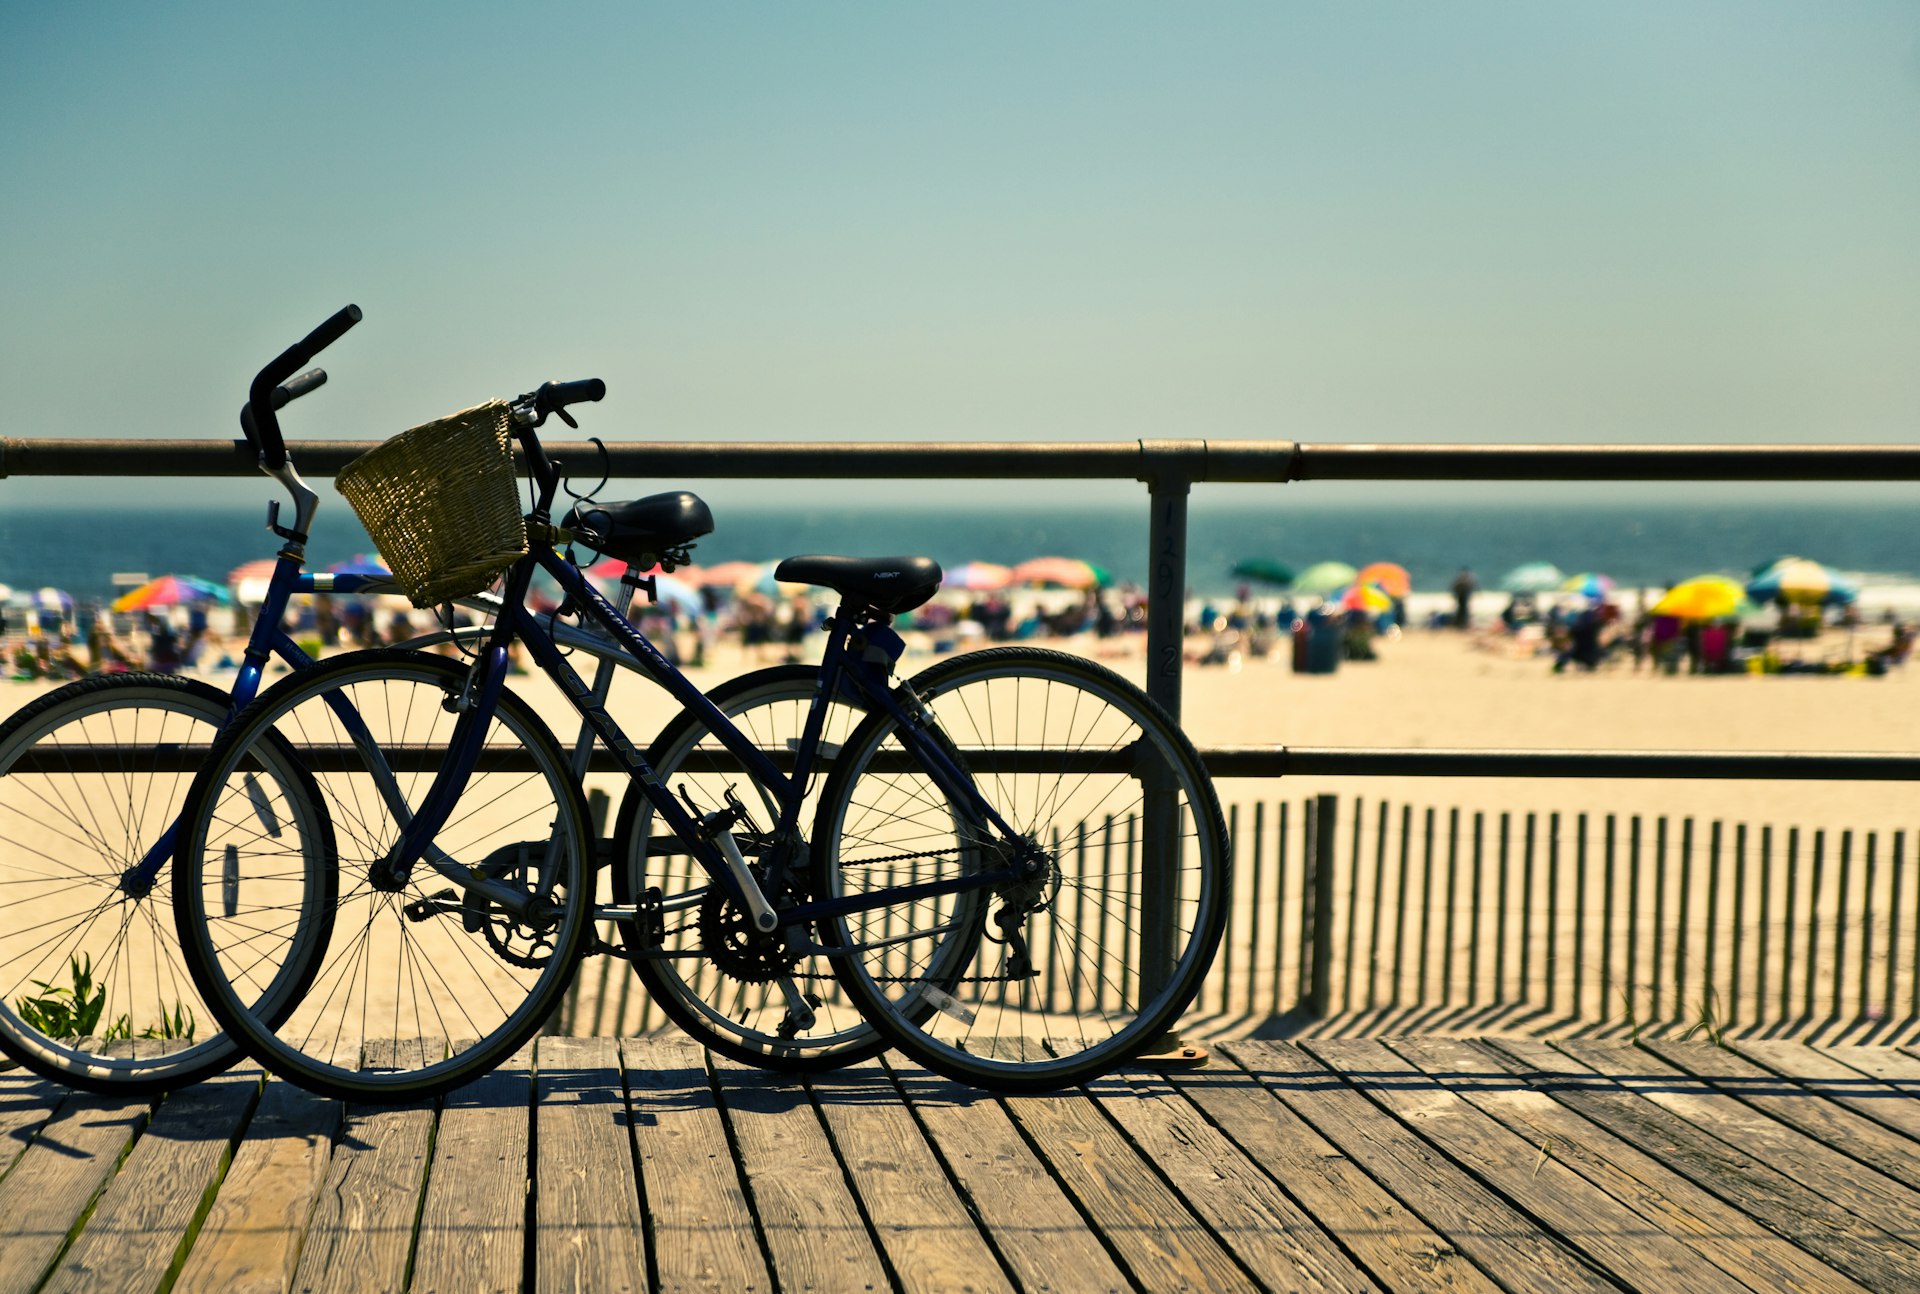 Bicycles in silhouette, propped by the edge of the boardwalk, against a backdrop of a crowded beach